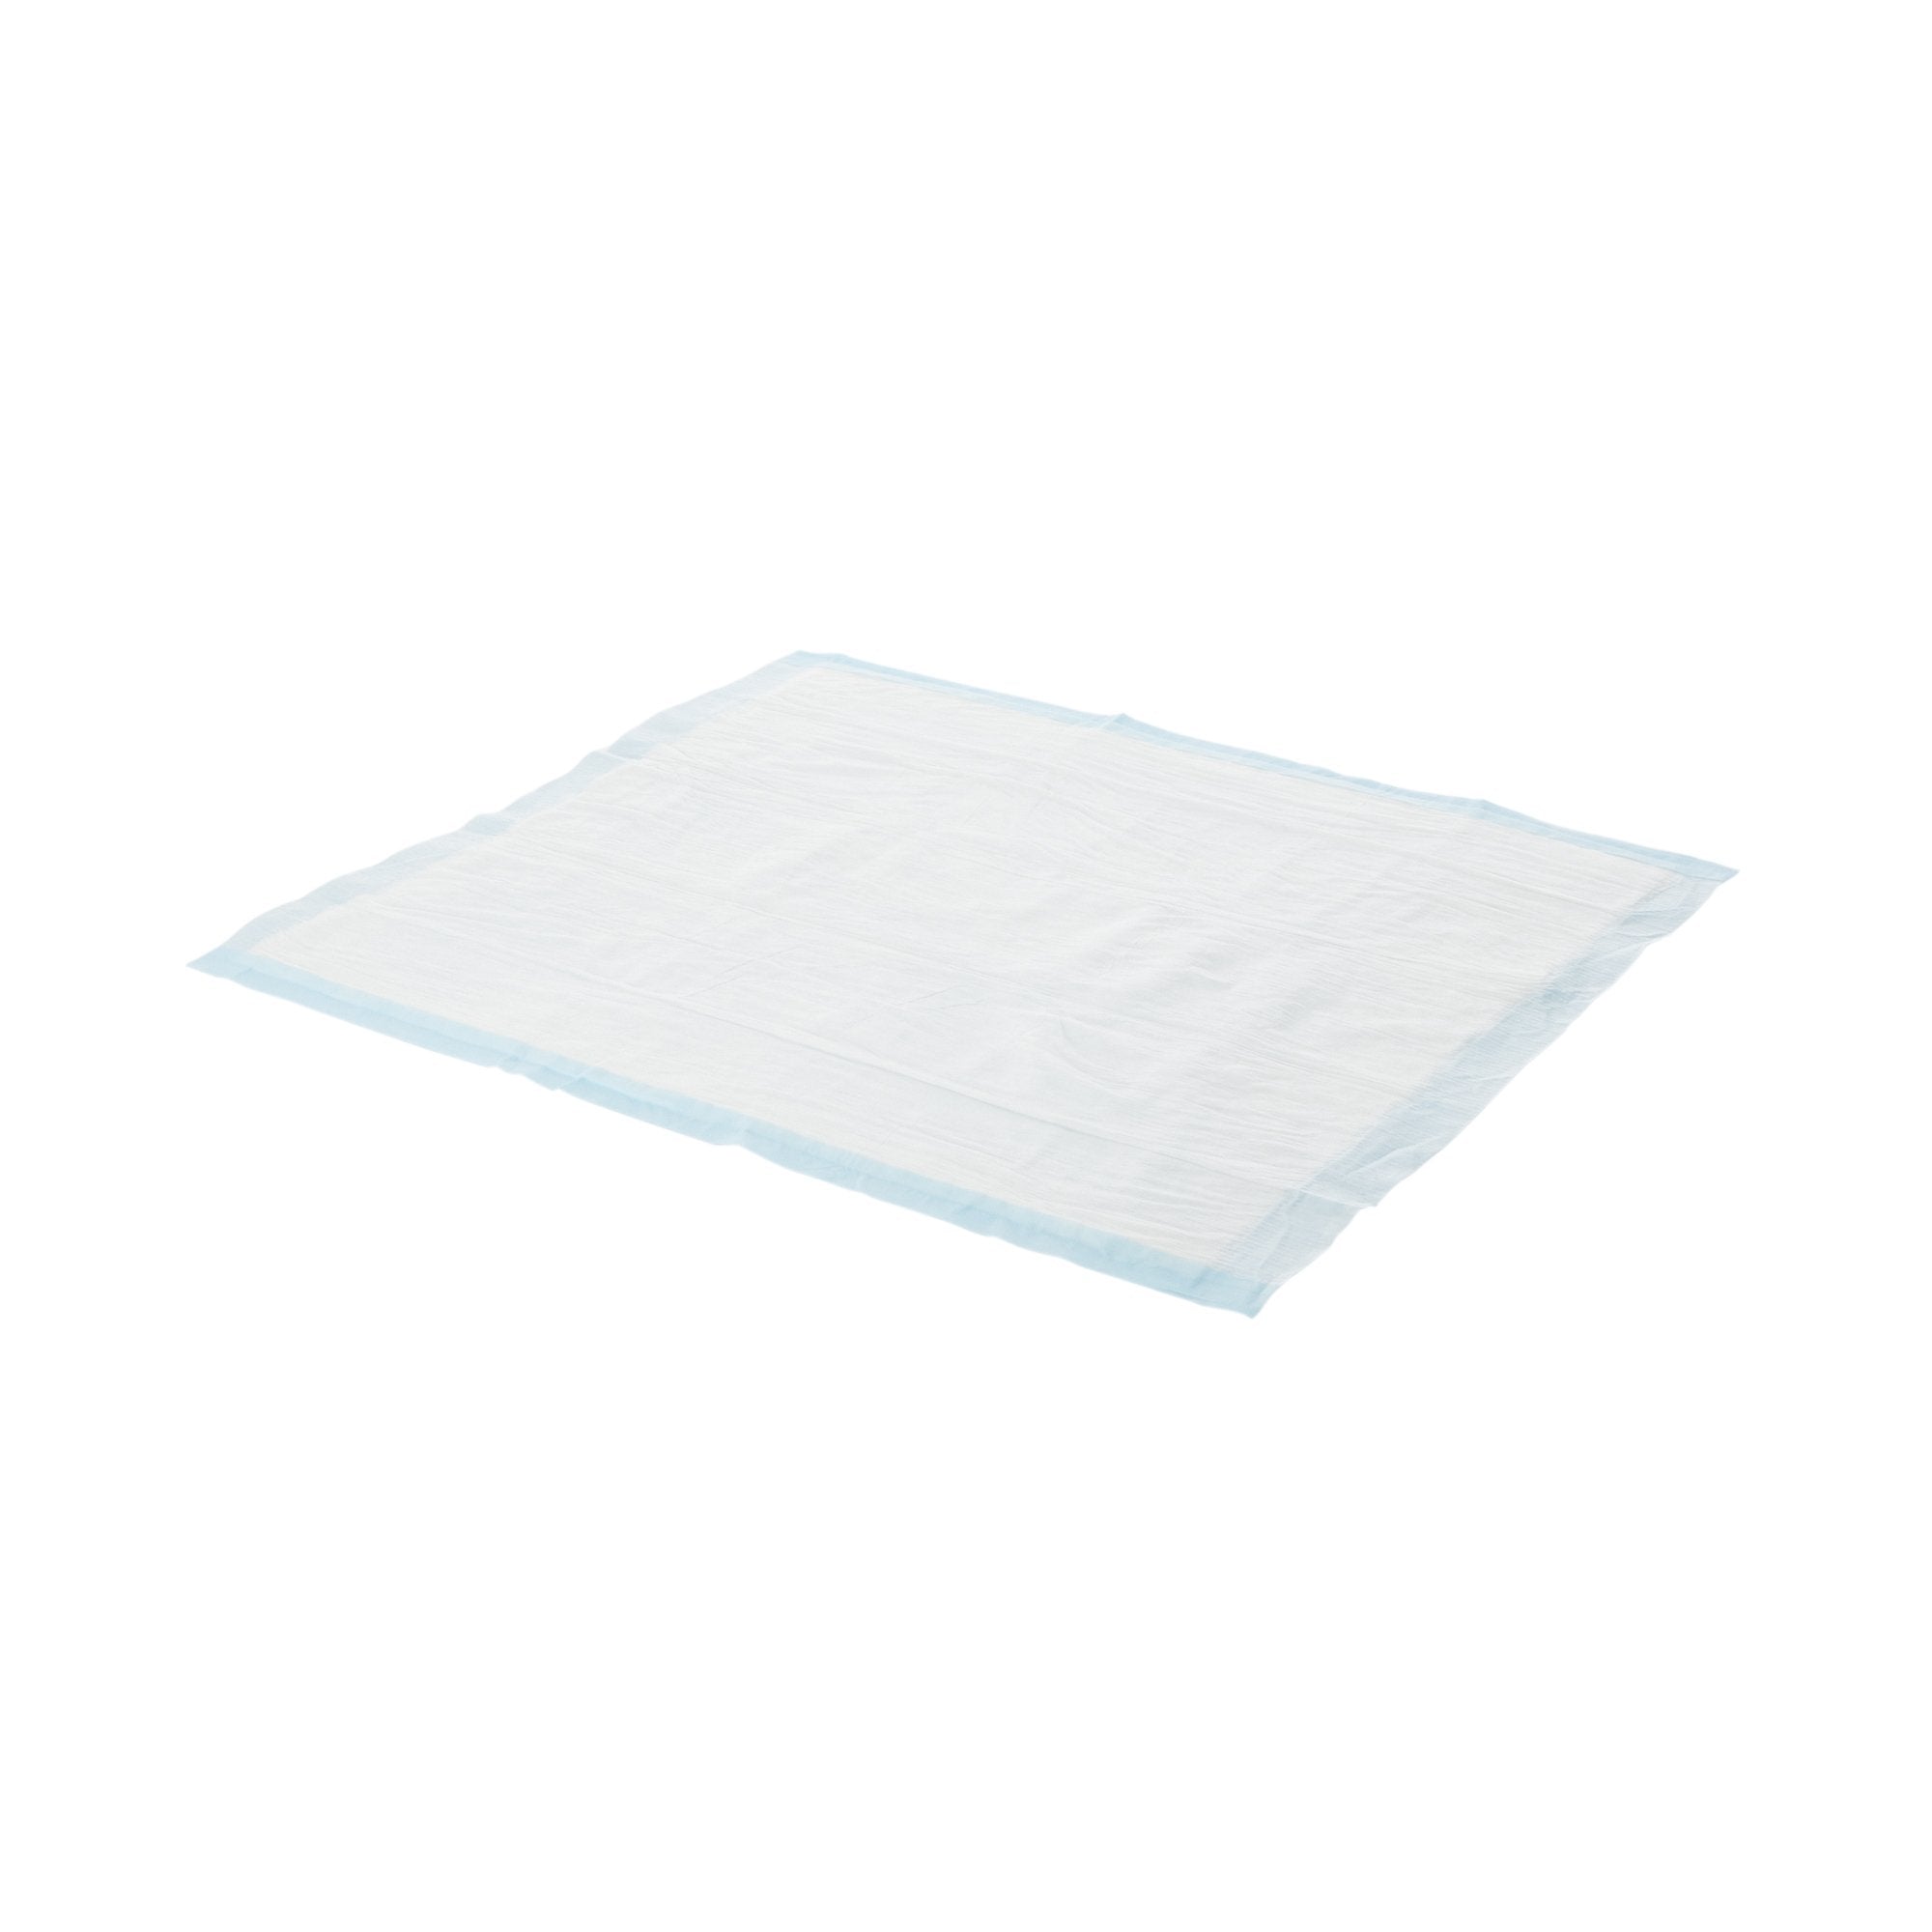 Disposable Underpad Prevail Air Permeable 23 X 36 Inch Polymer Heavy Absorbency